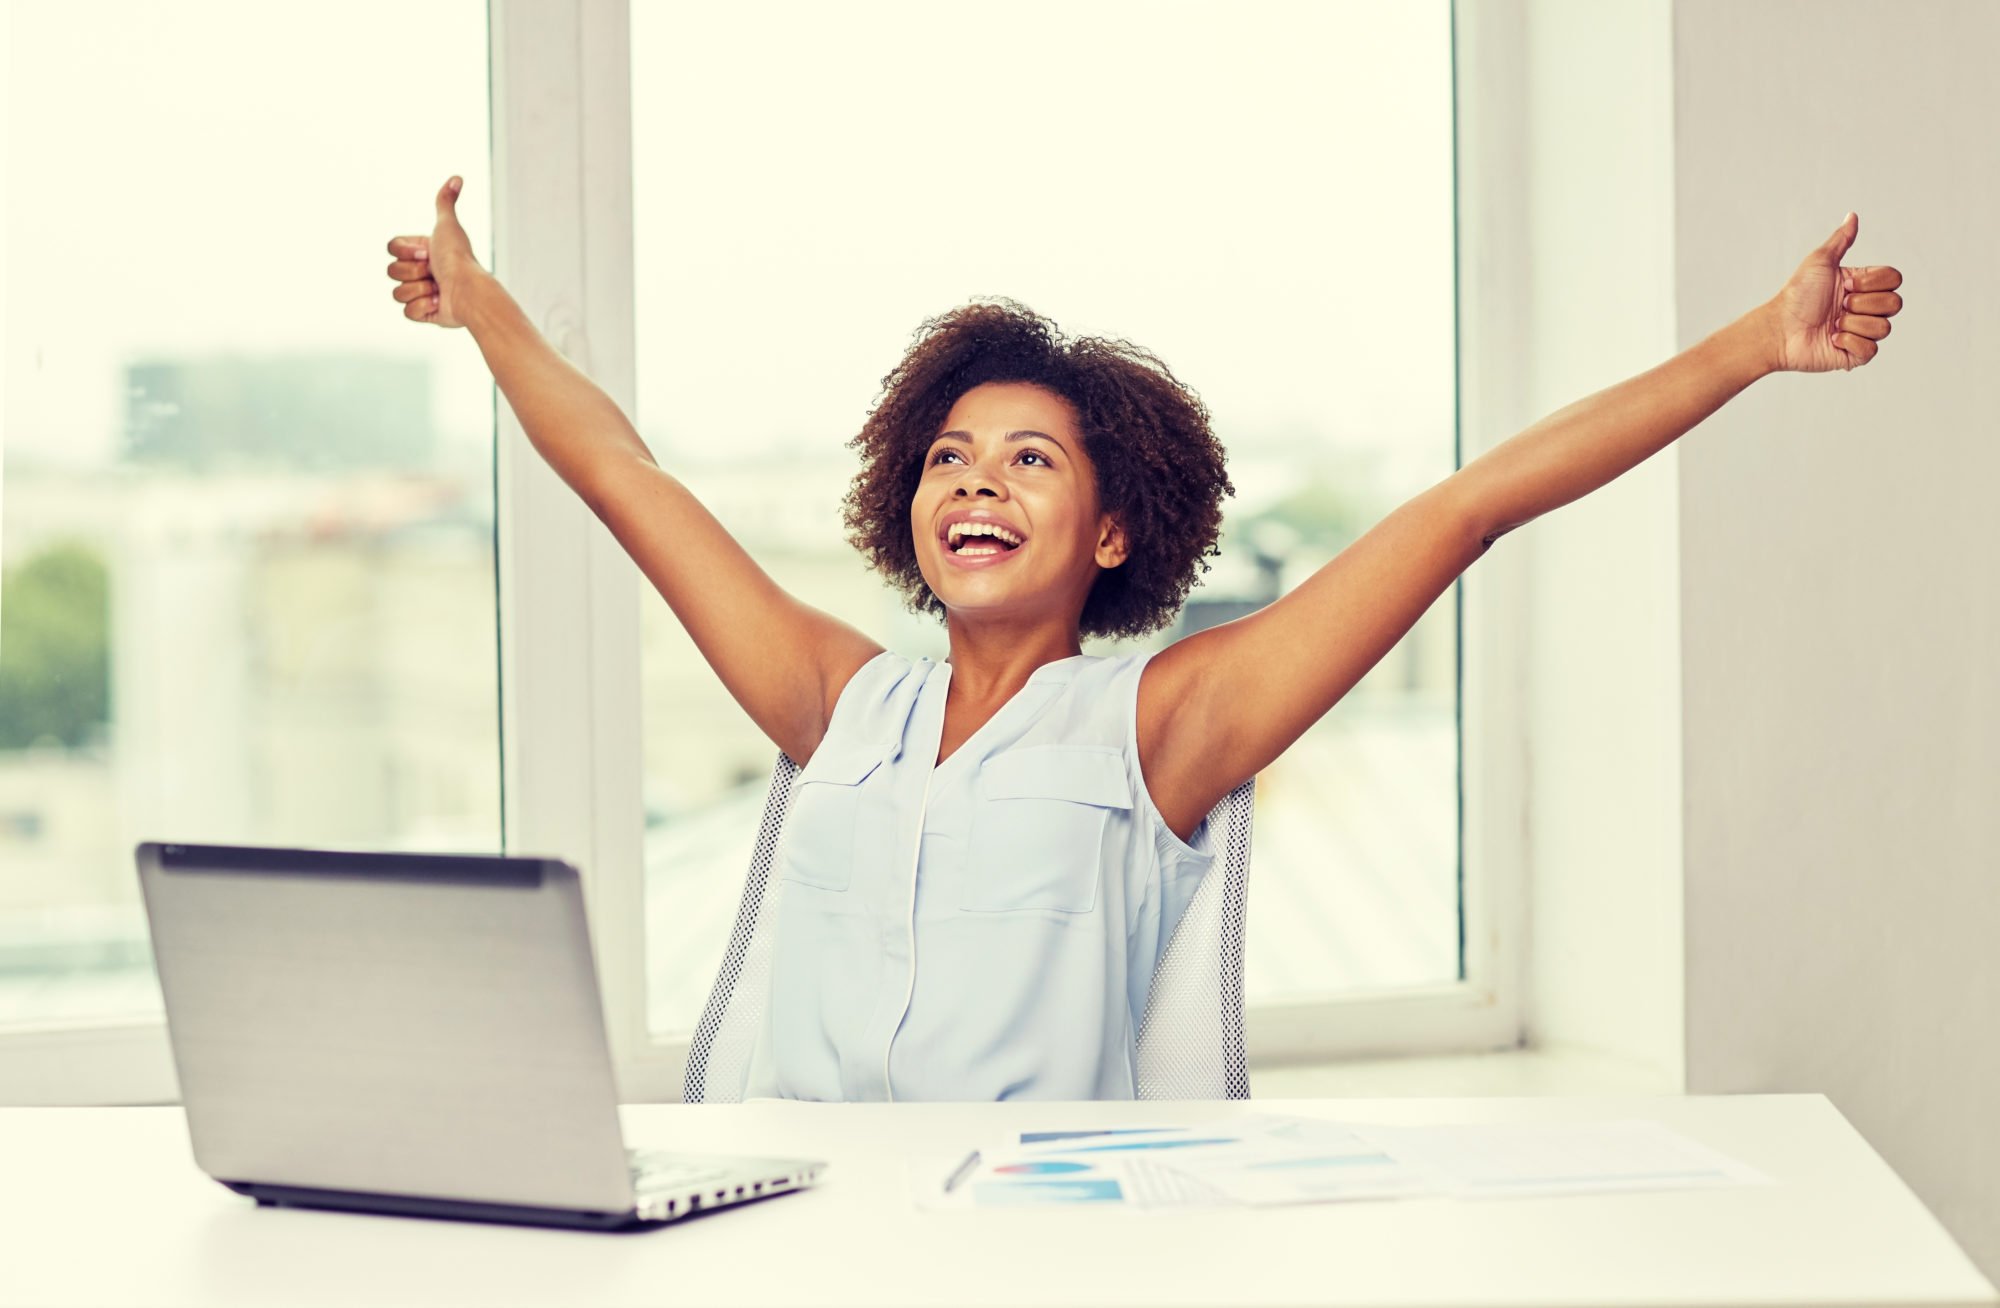 7 Things You Can Do To Make You Happier At Work